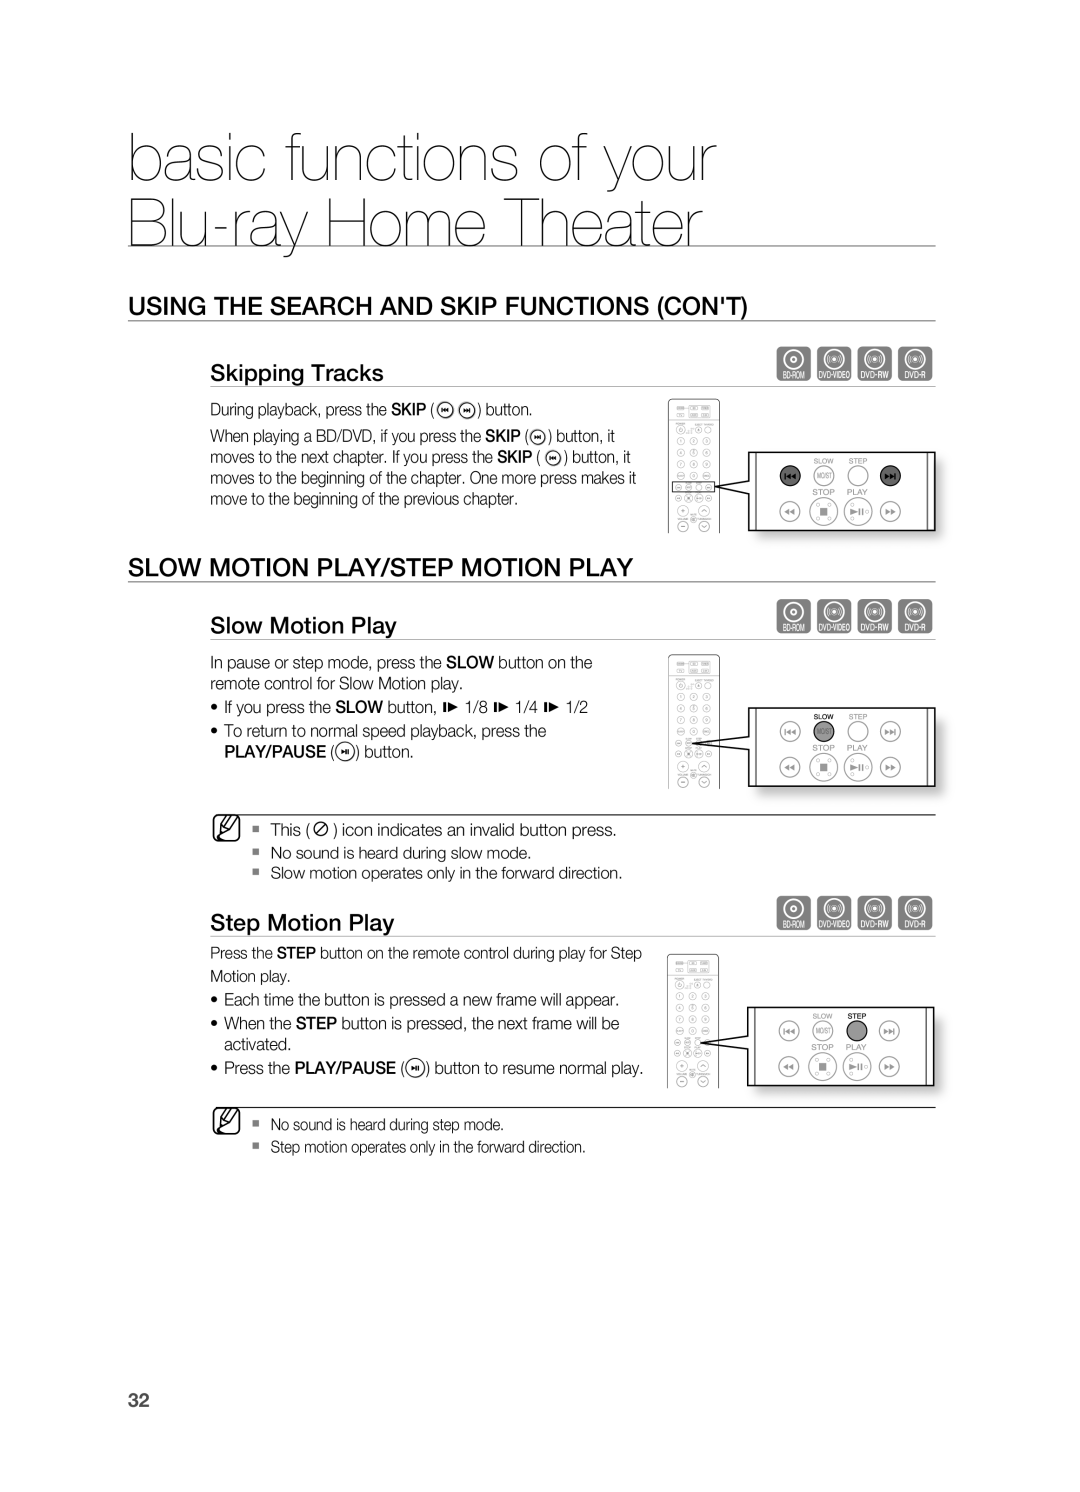 Samsung HT-BD2S manual USIng THE SEARCH AnD SKIP FUnCTIOnS COnT, SLOW MOTIOn PLAY/STEP MOTIOn PLAY, Skipping Tracks, hZCV 